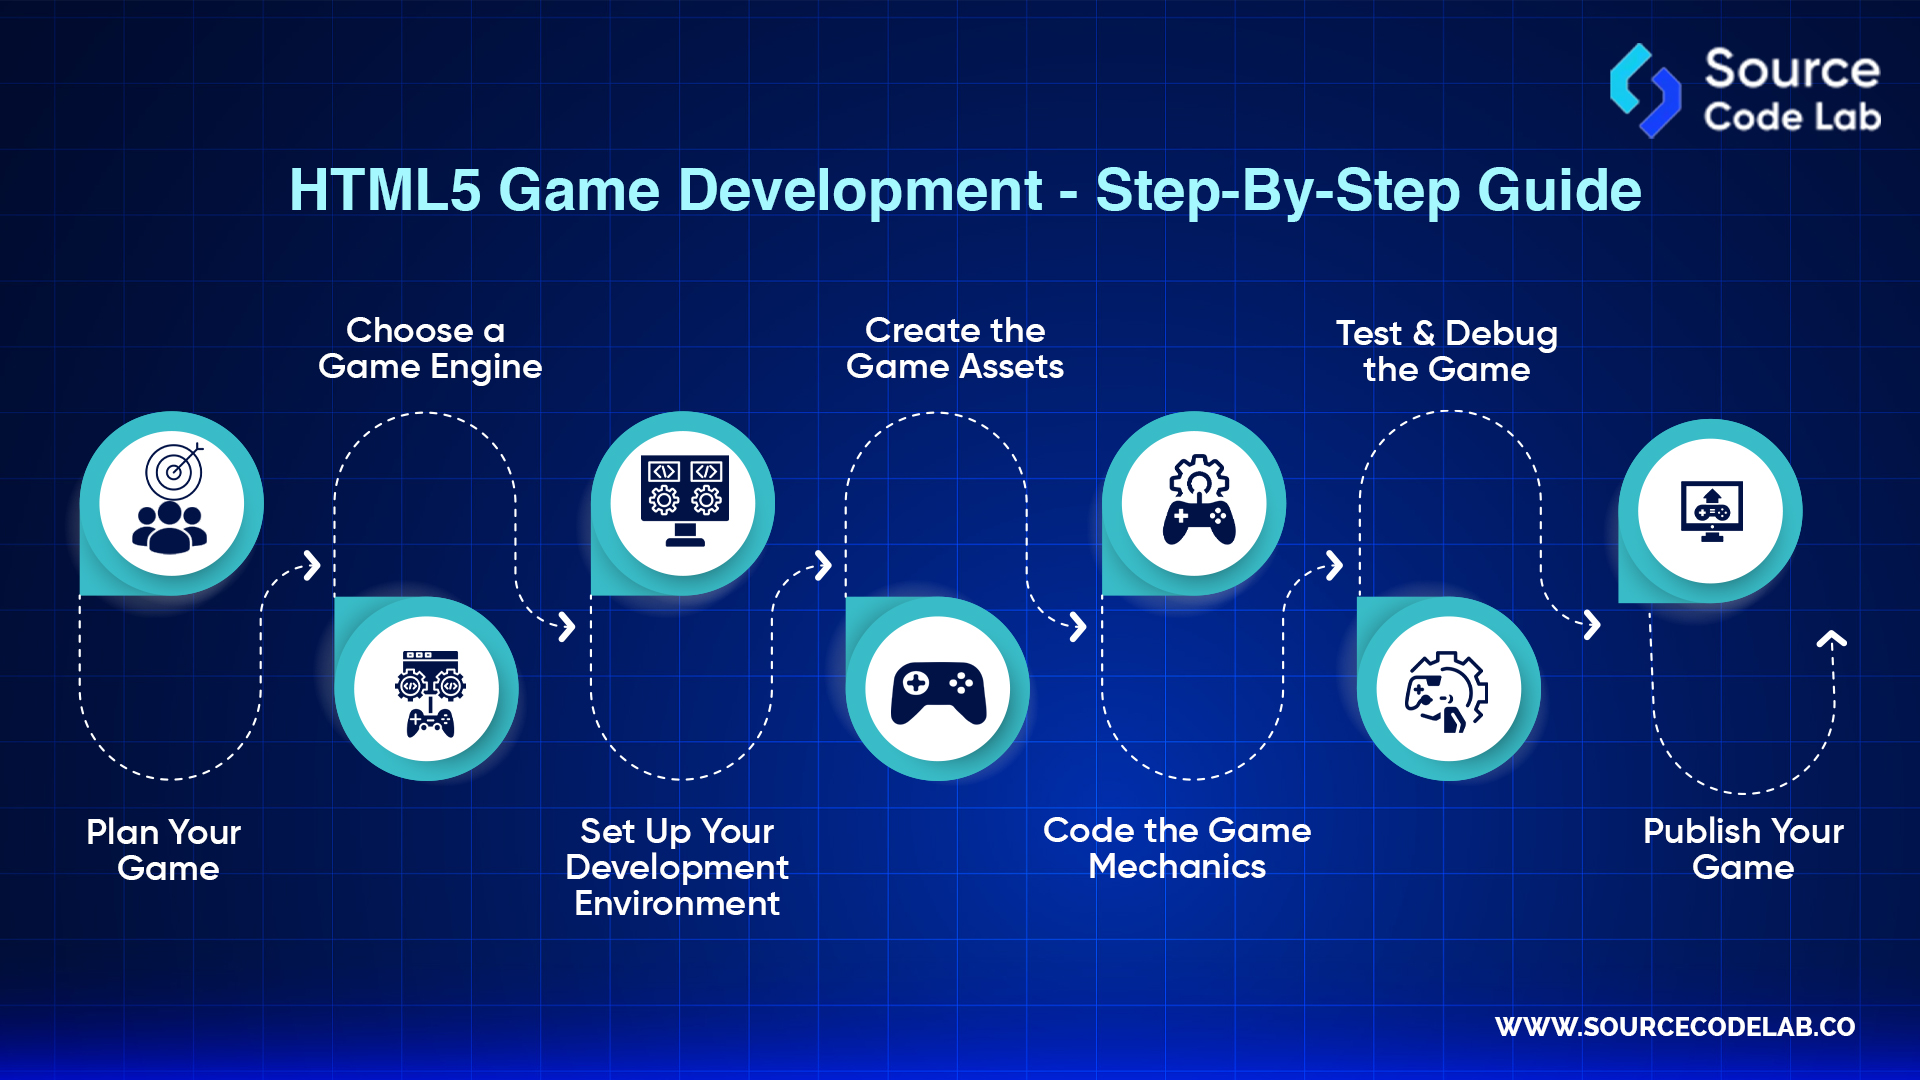 HTML5 Game Development - Step-By-Step Guide